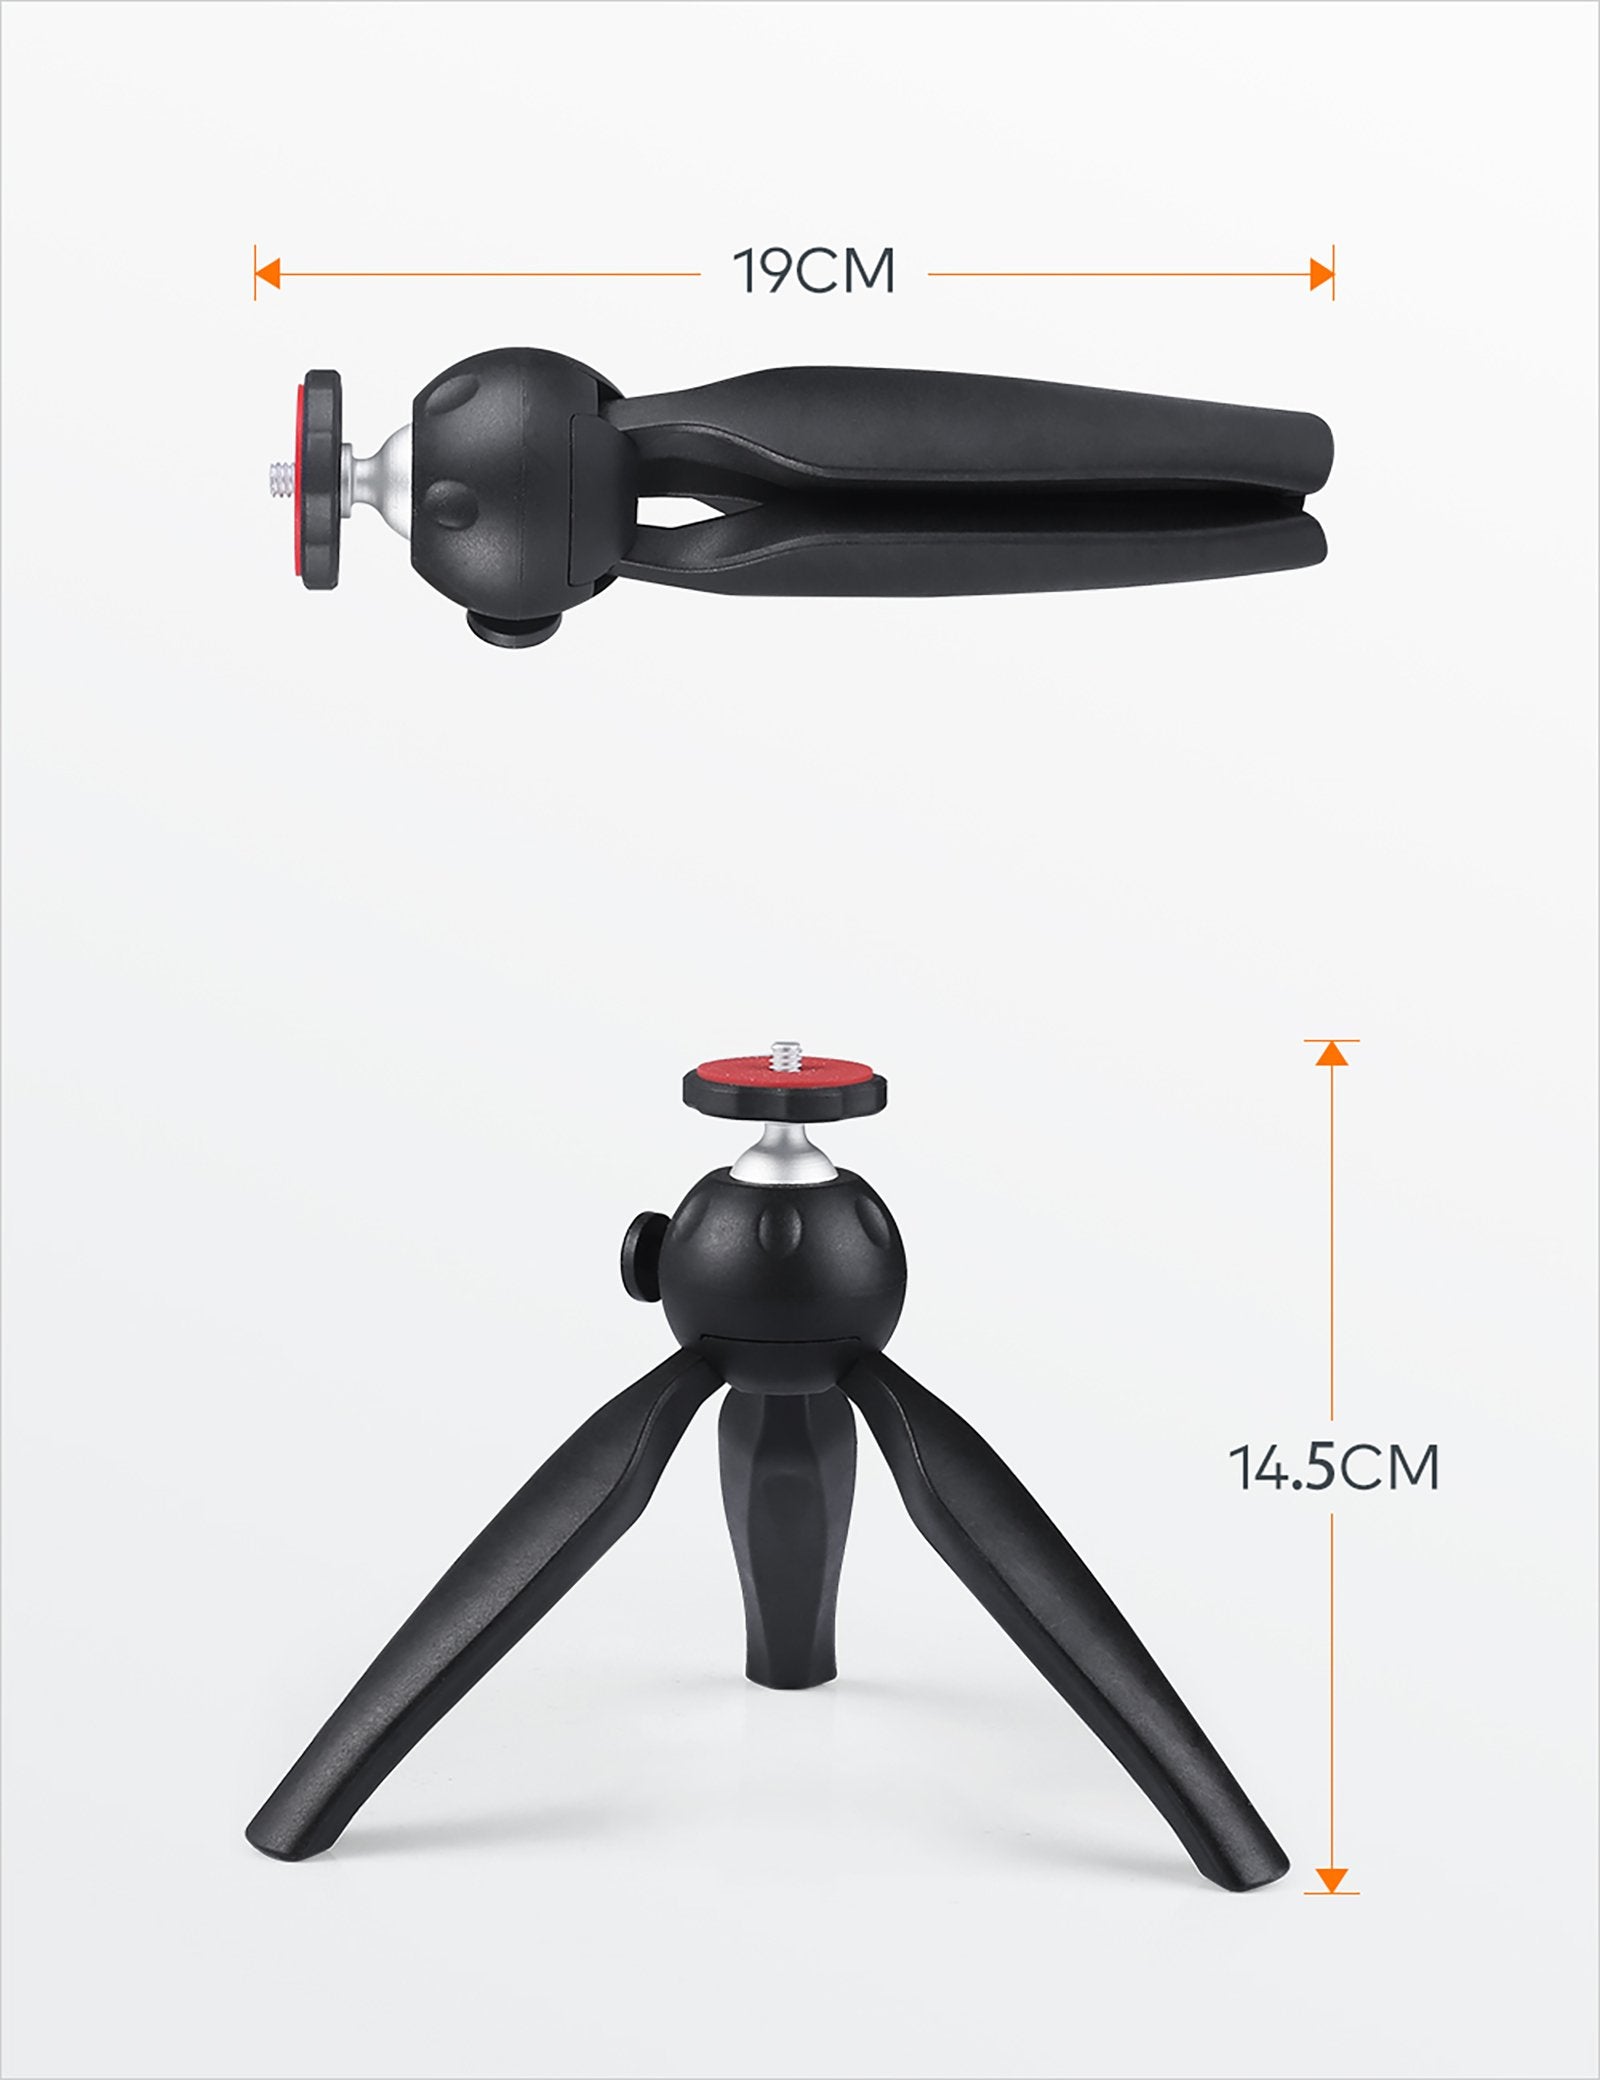 YOTON Tripod for Mini Portable Projector for Y3 and Y3PW